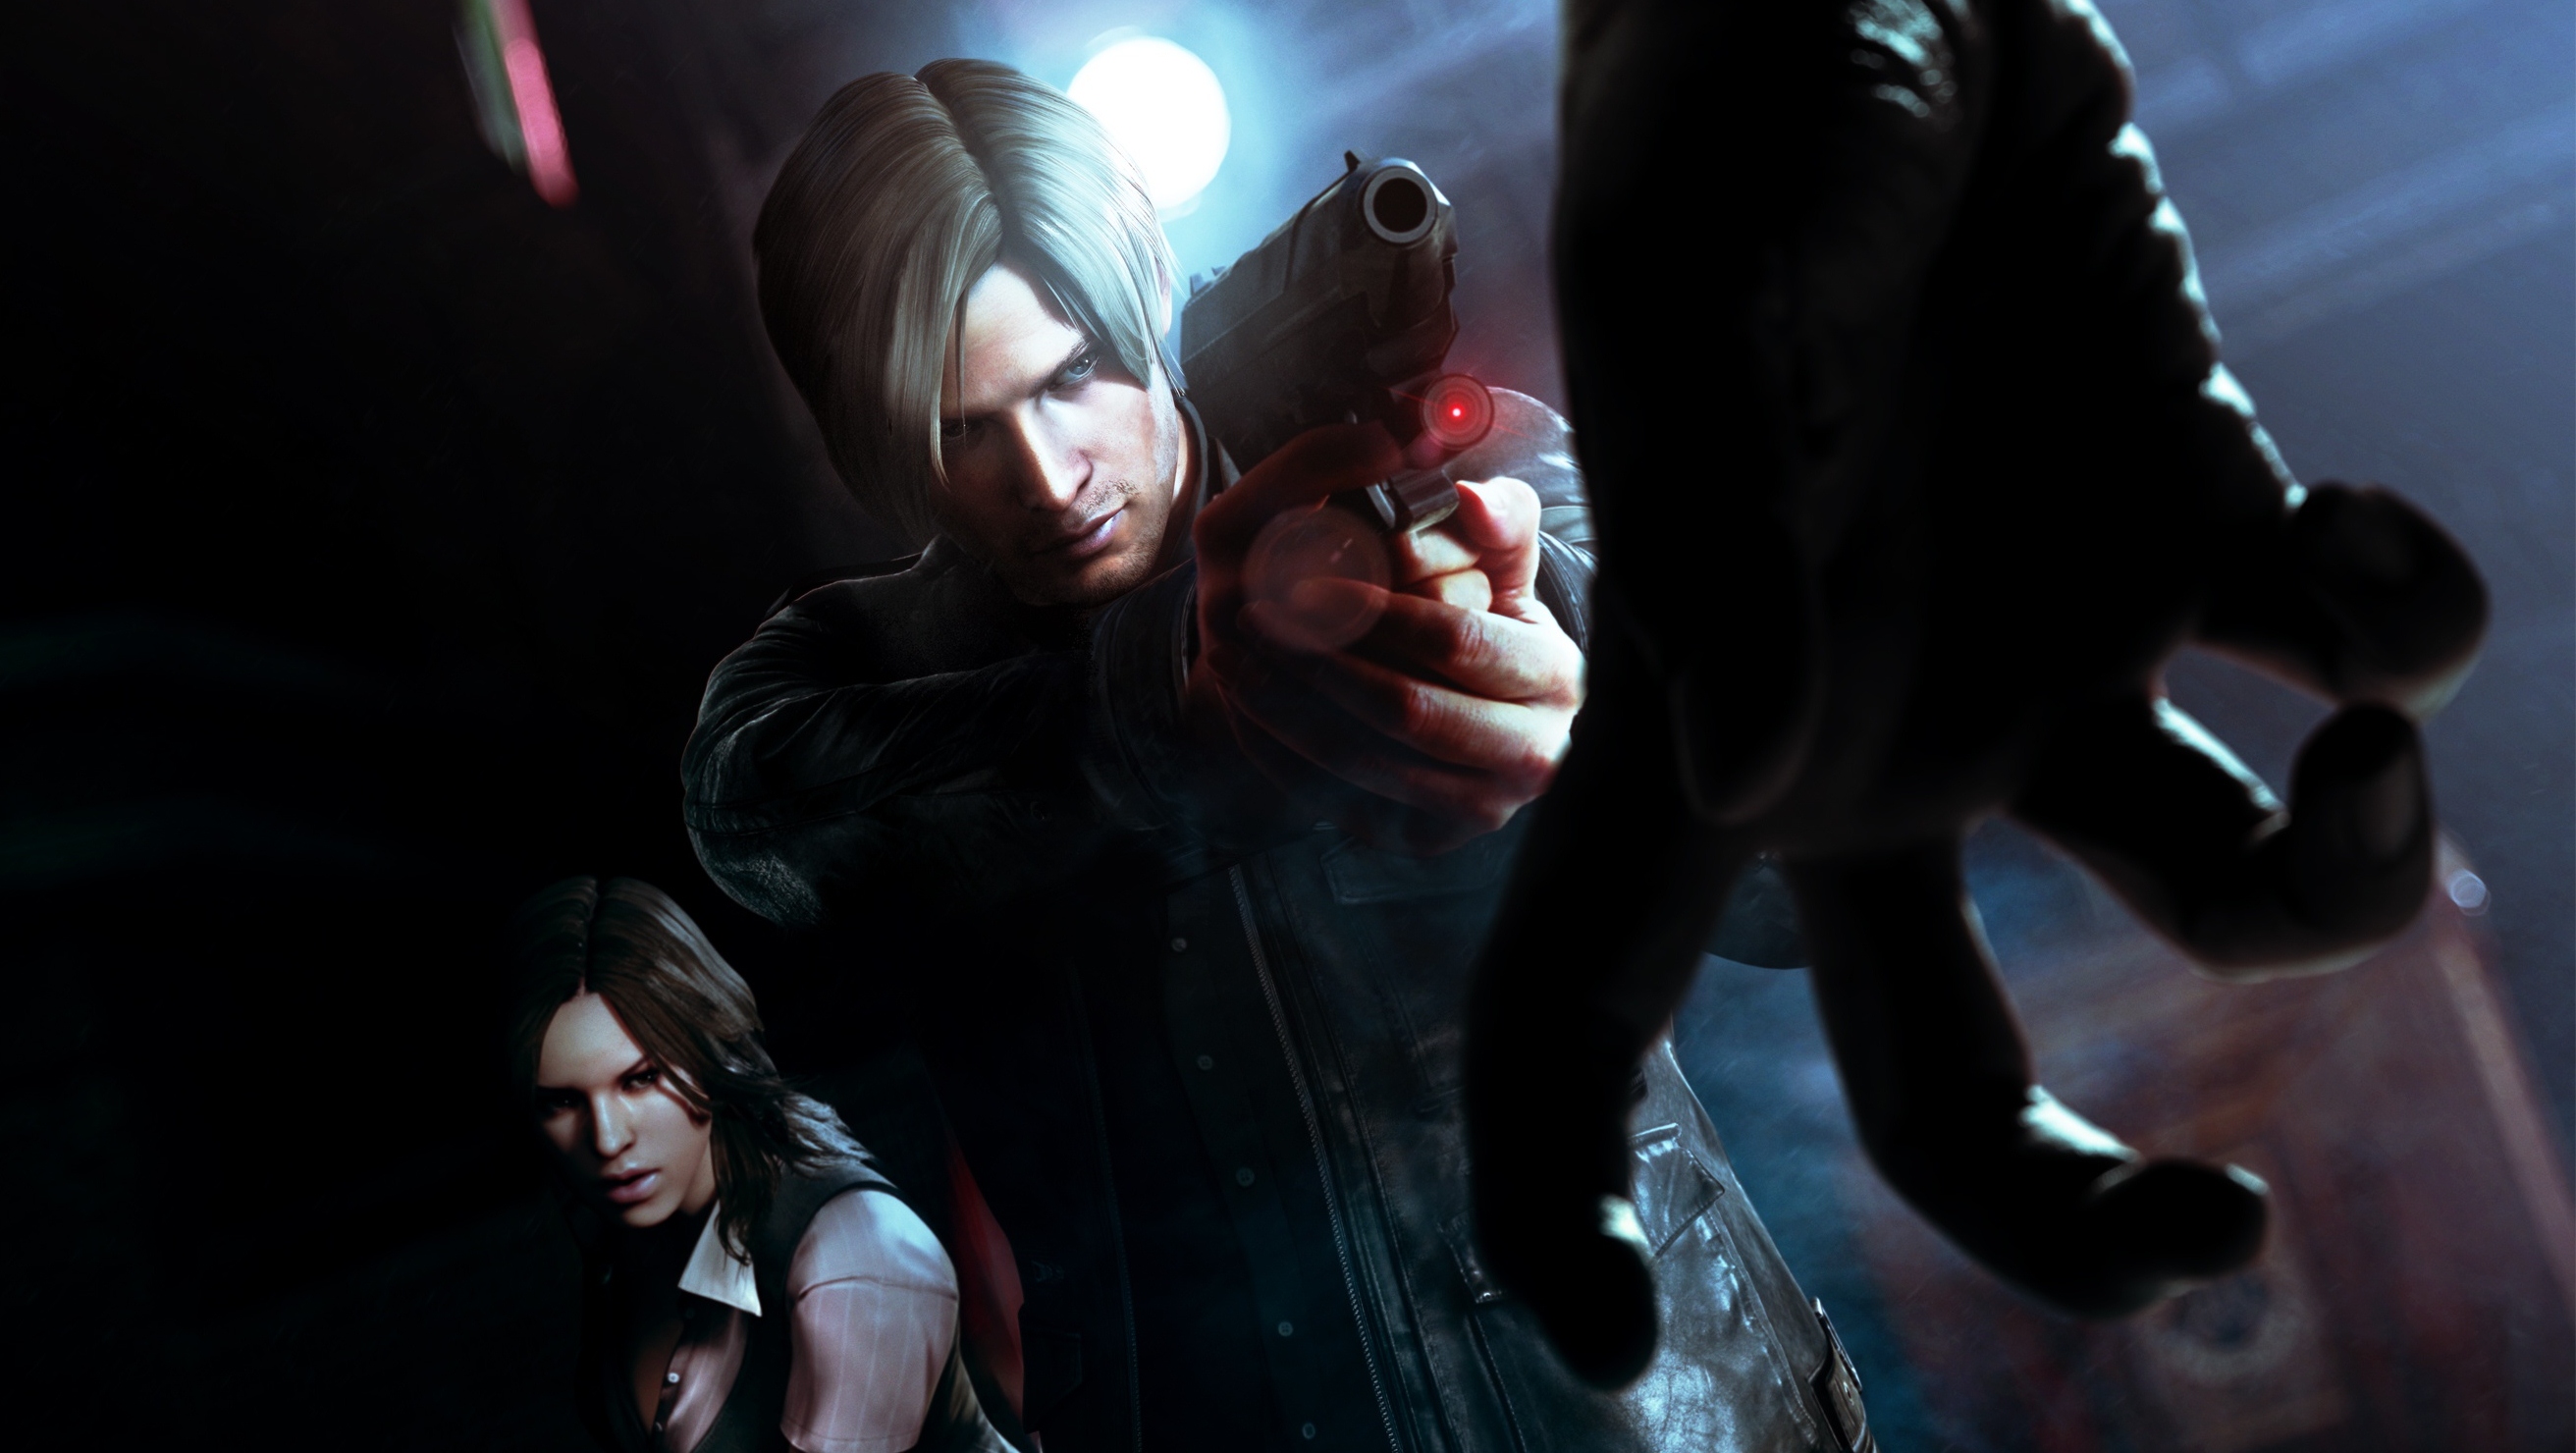 Video Game Resident Evil 6 HD Wallpaper | Background Image